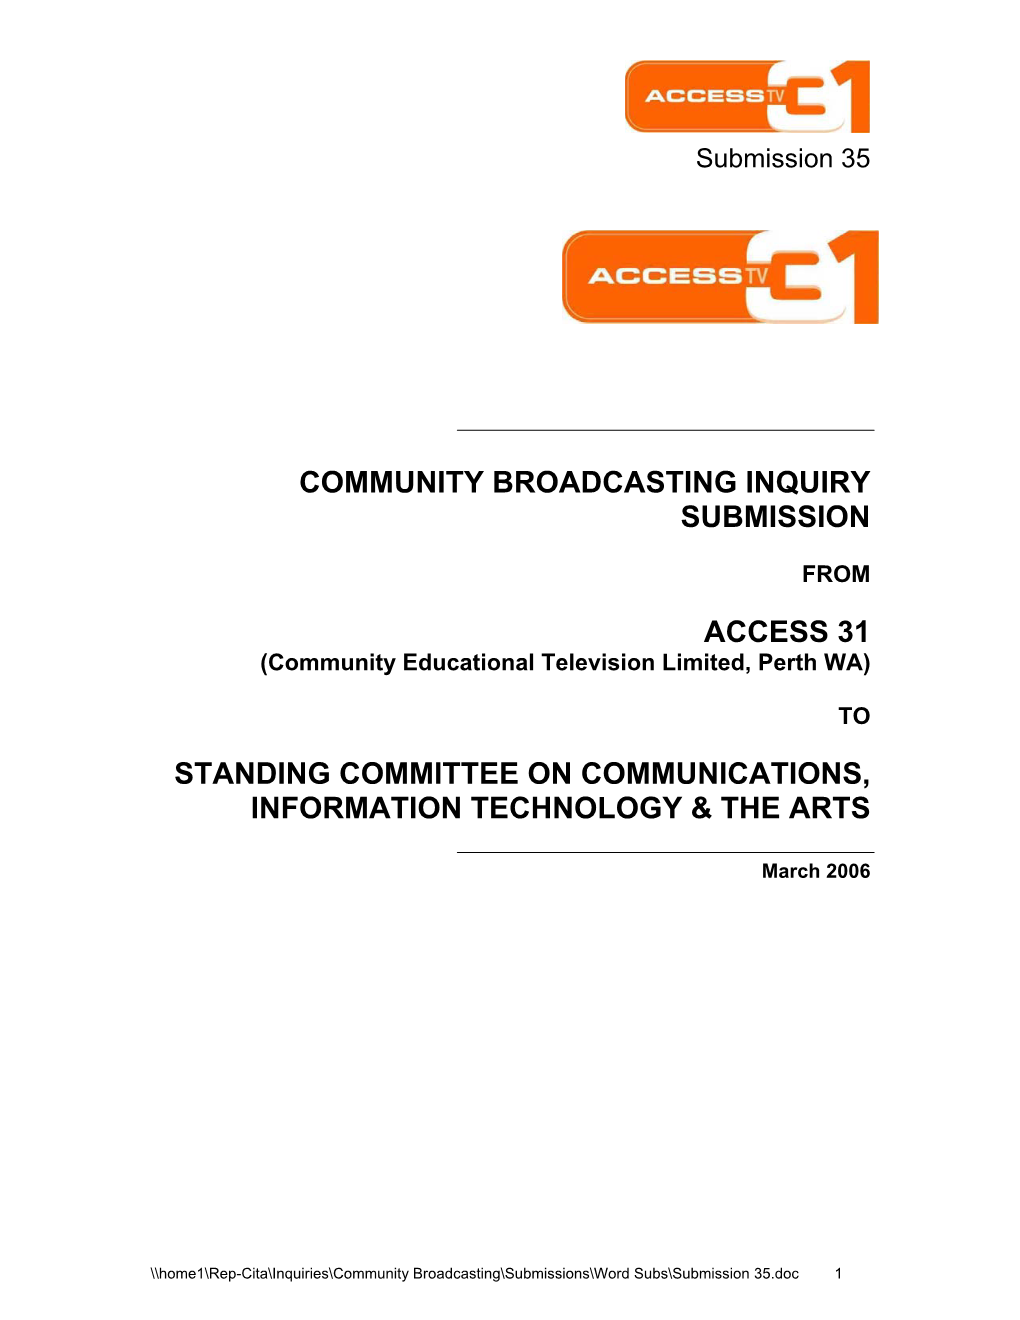 Community Broadcasting Inquiry Submission Access